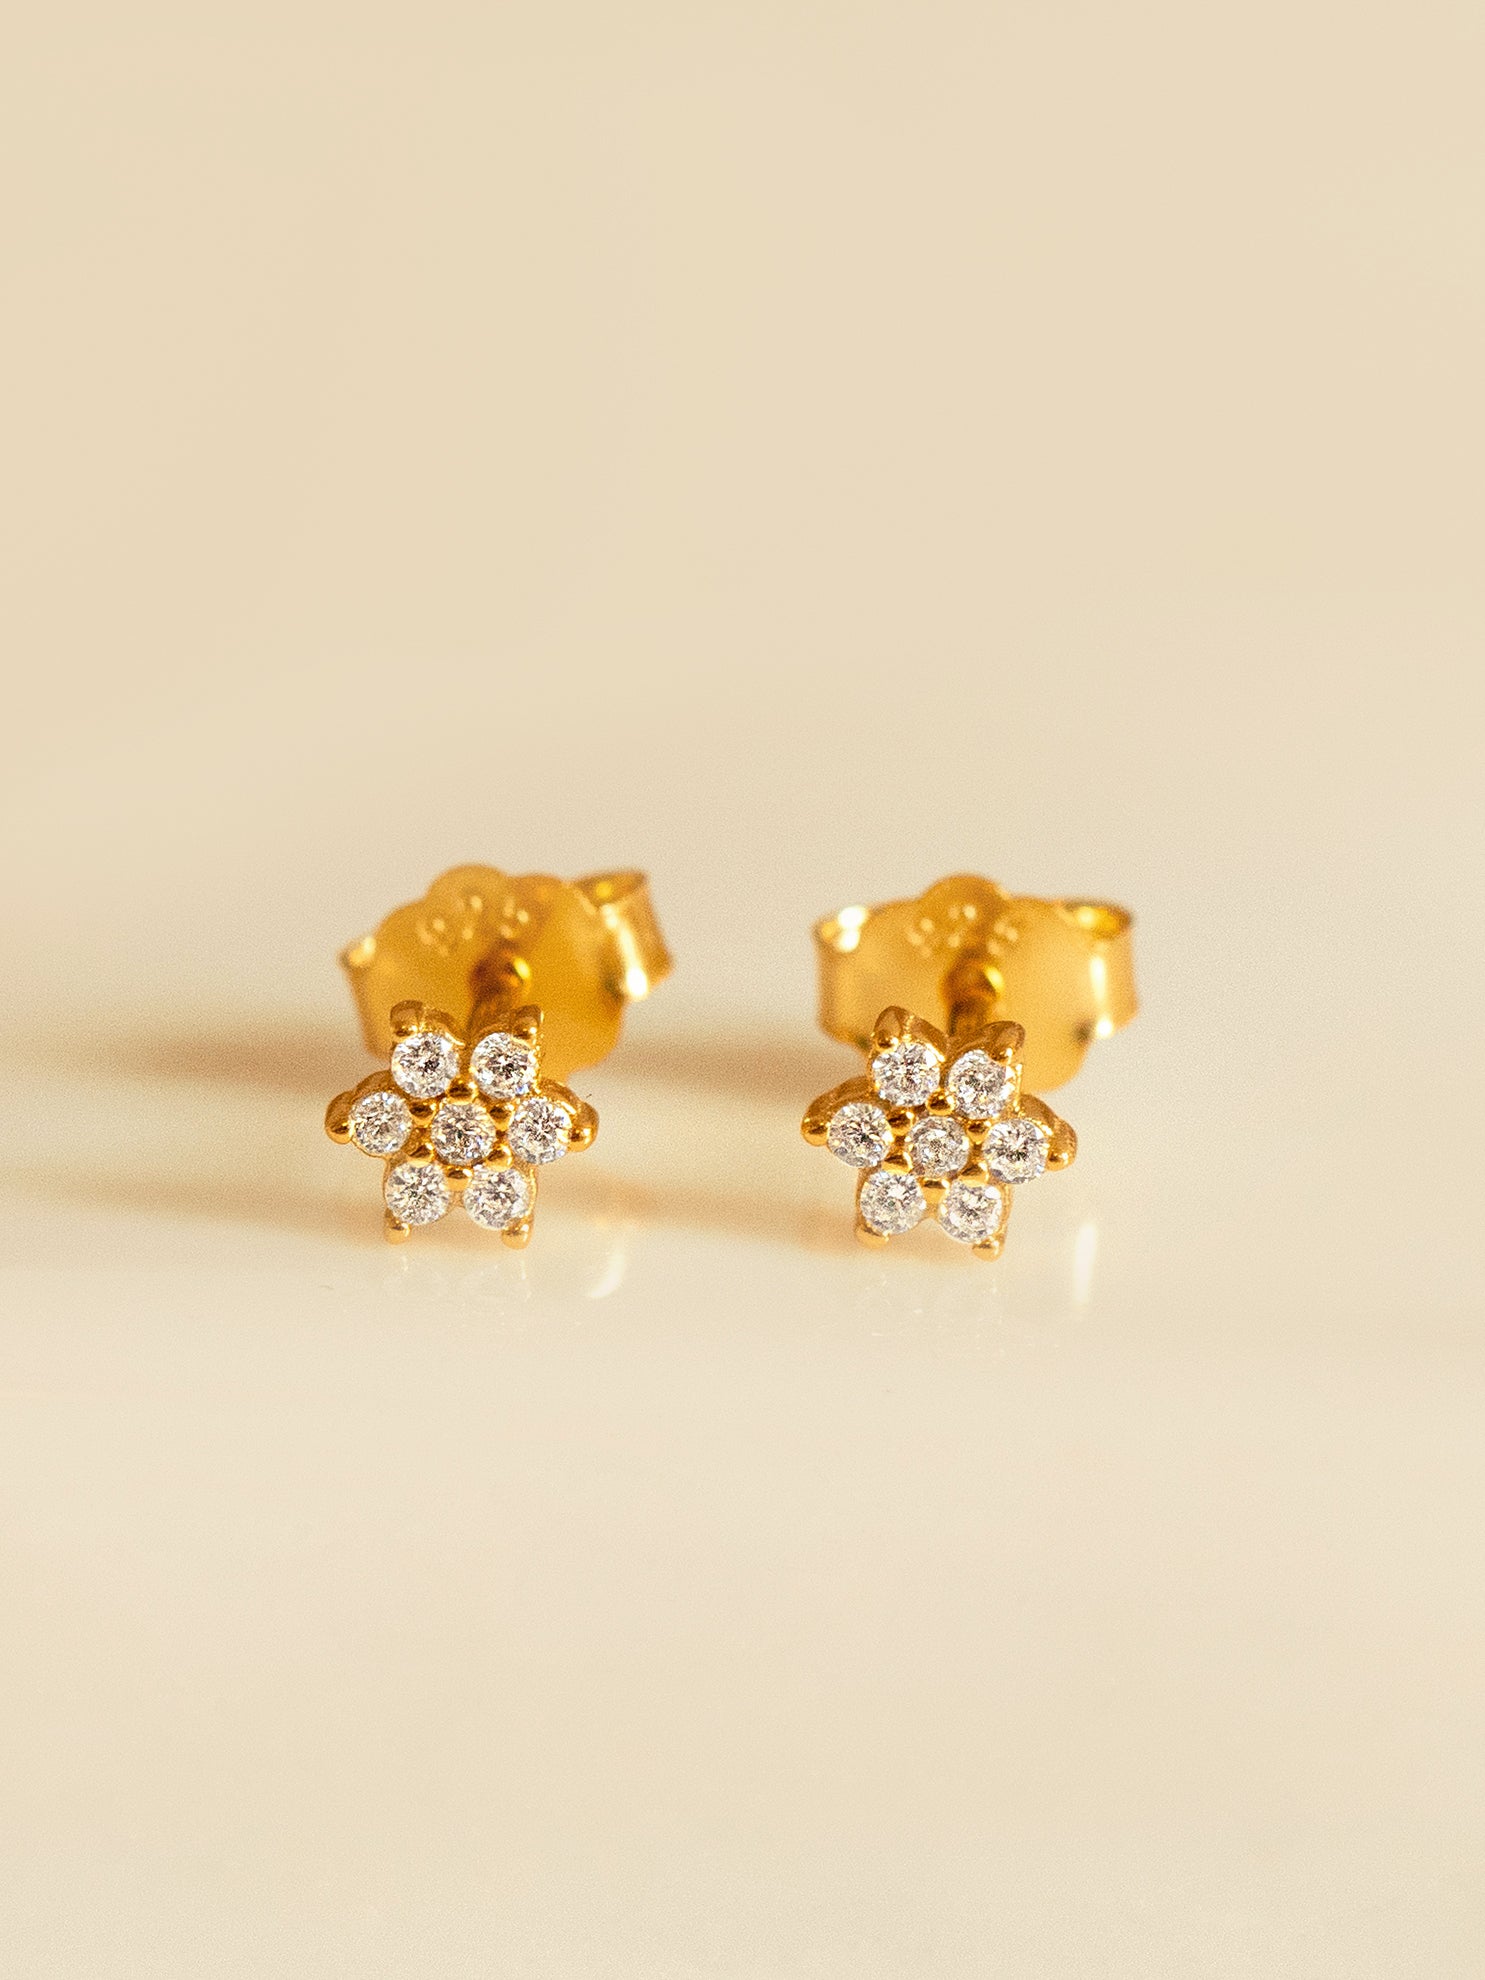 Gold Cluster Stud Earrings - Tiny Flowers